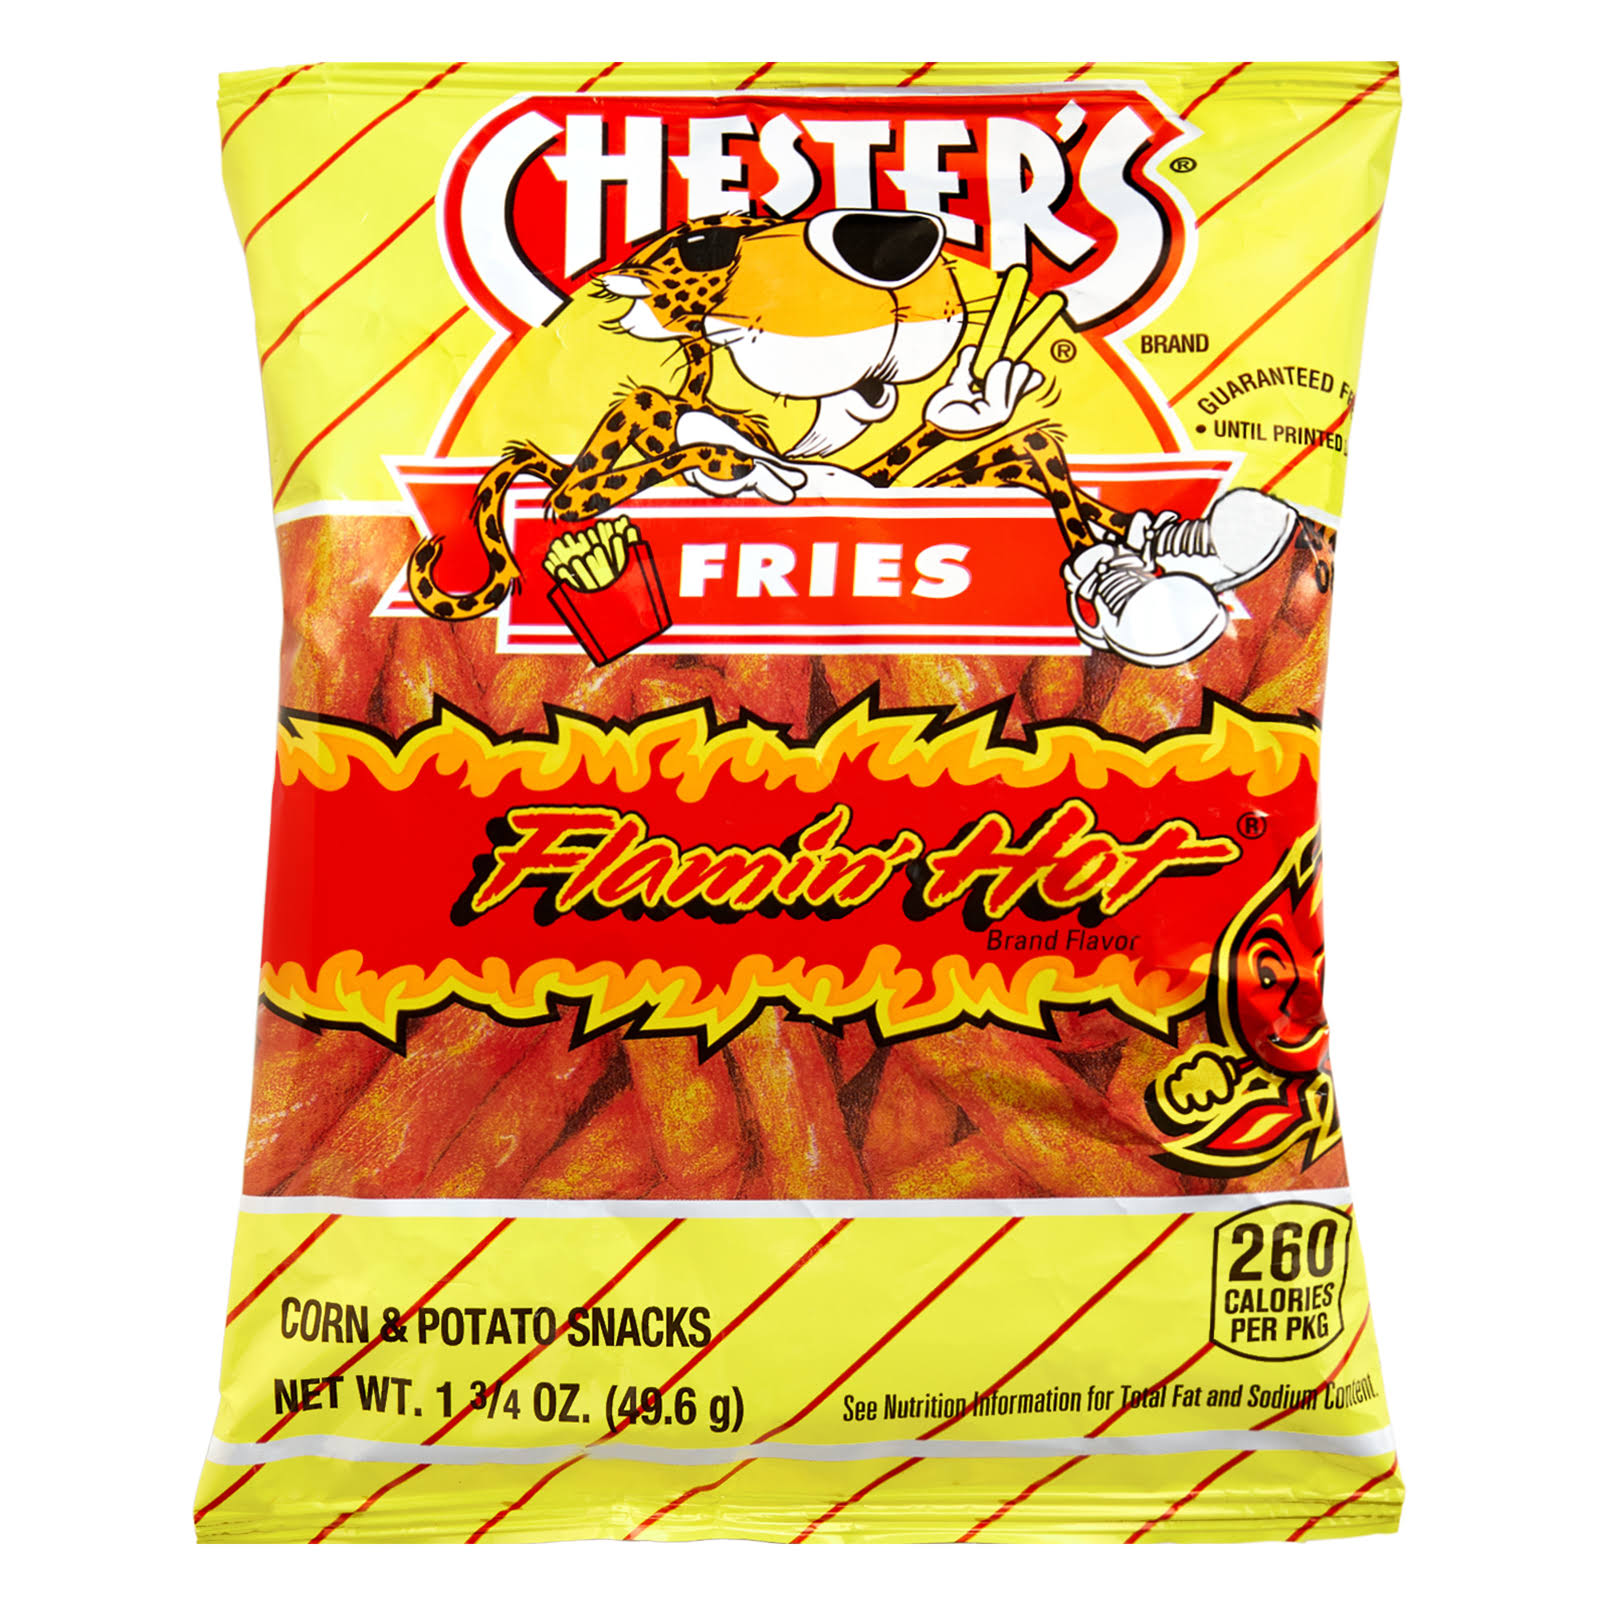 Chesters Fries Flamin Hot (49.6g)